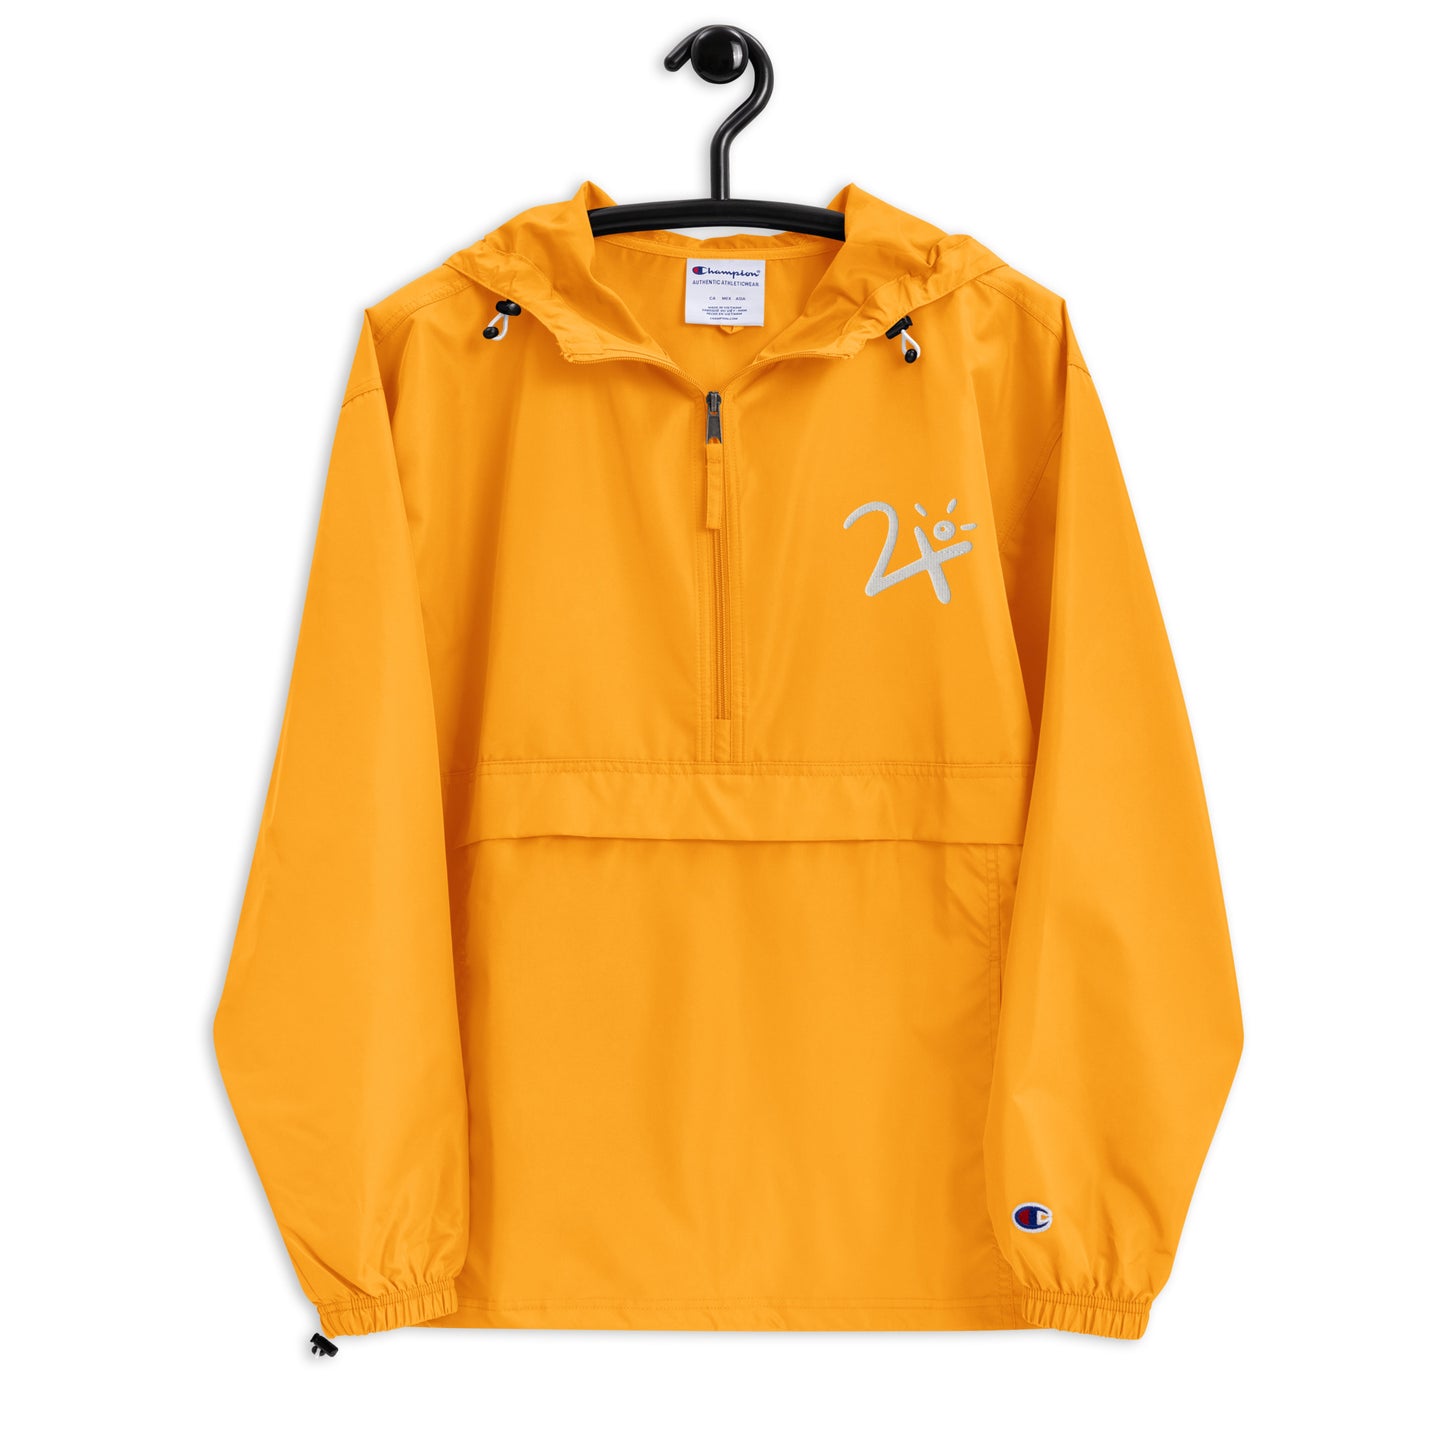 Embroidered Champion 2x10 Packable Jacket